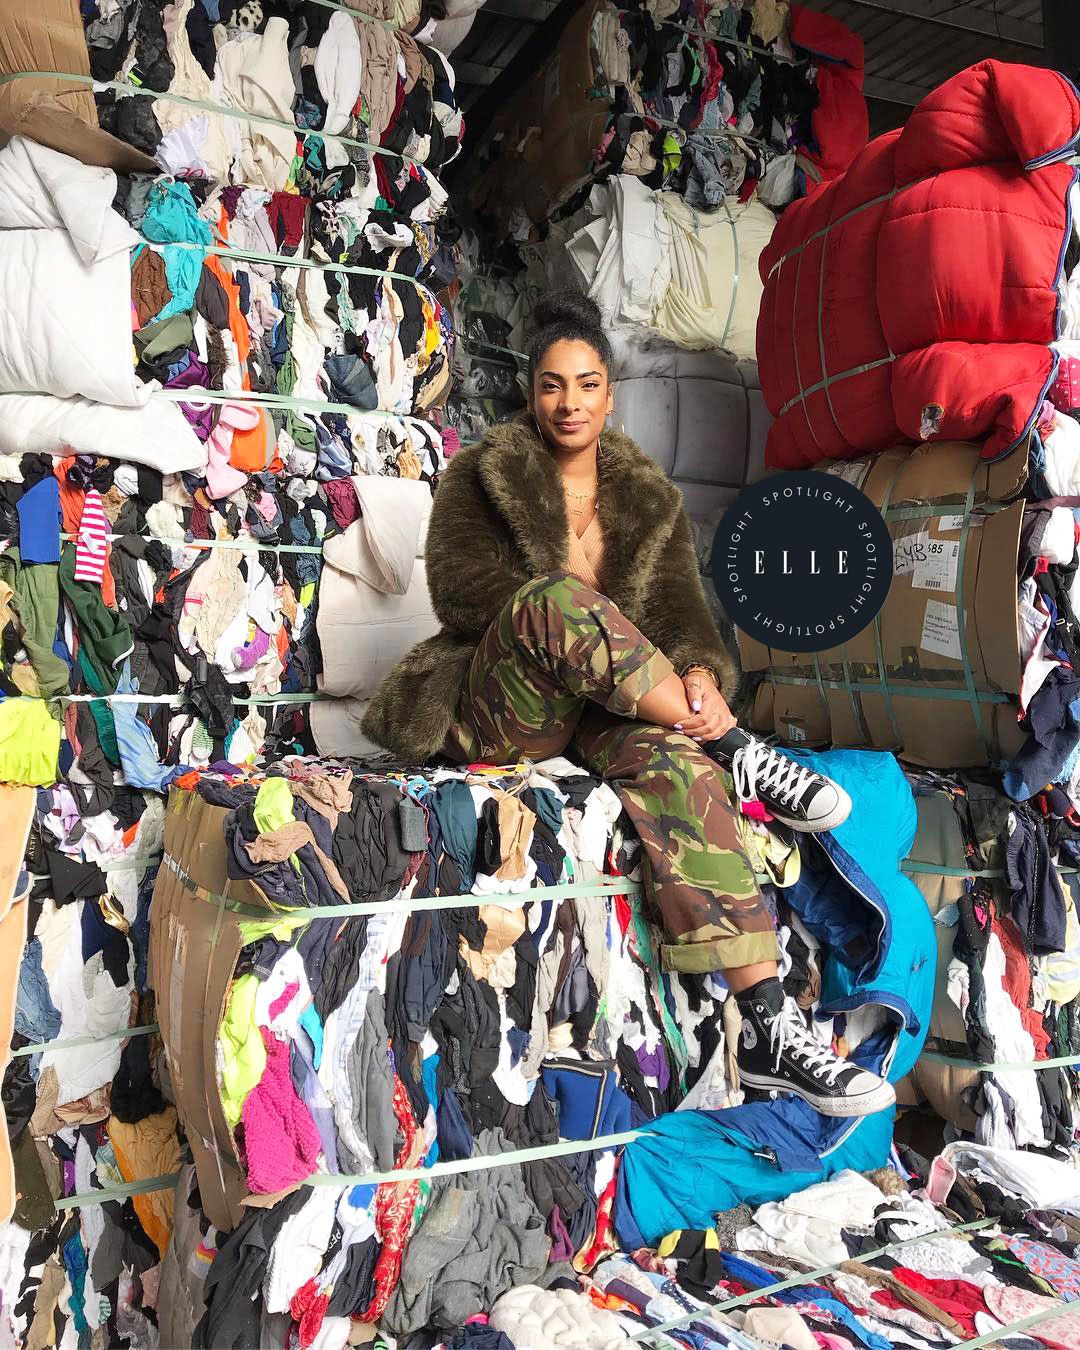 Priya Ahluwalia - The Up-And-Coming Fashion Brand To Invest In